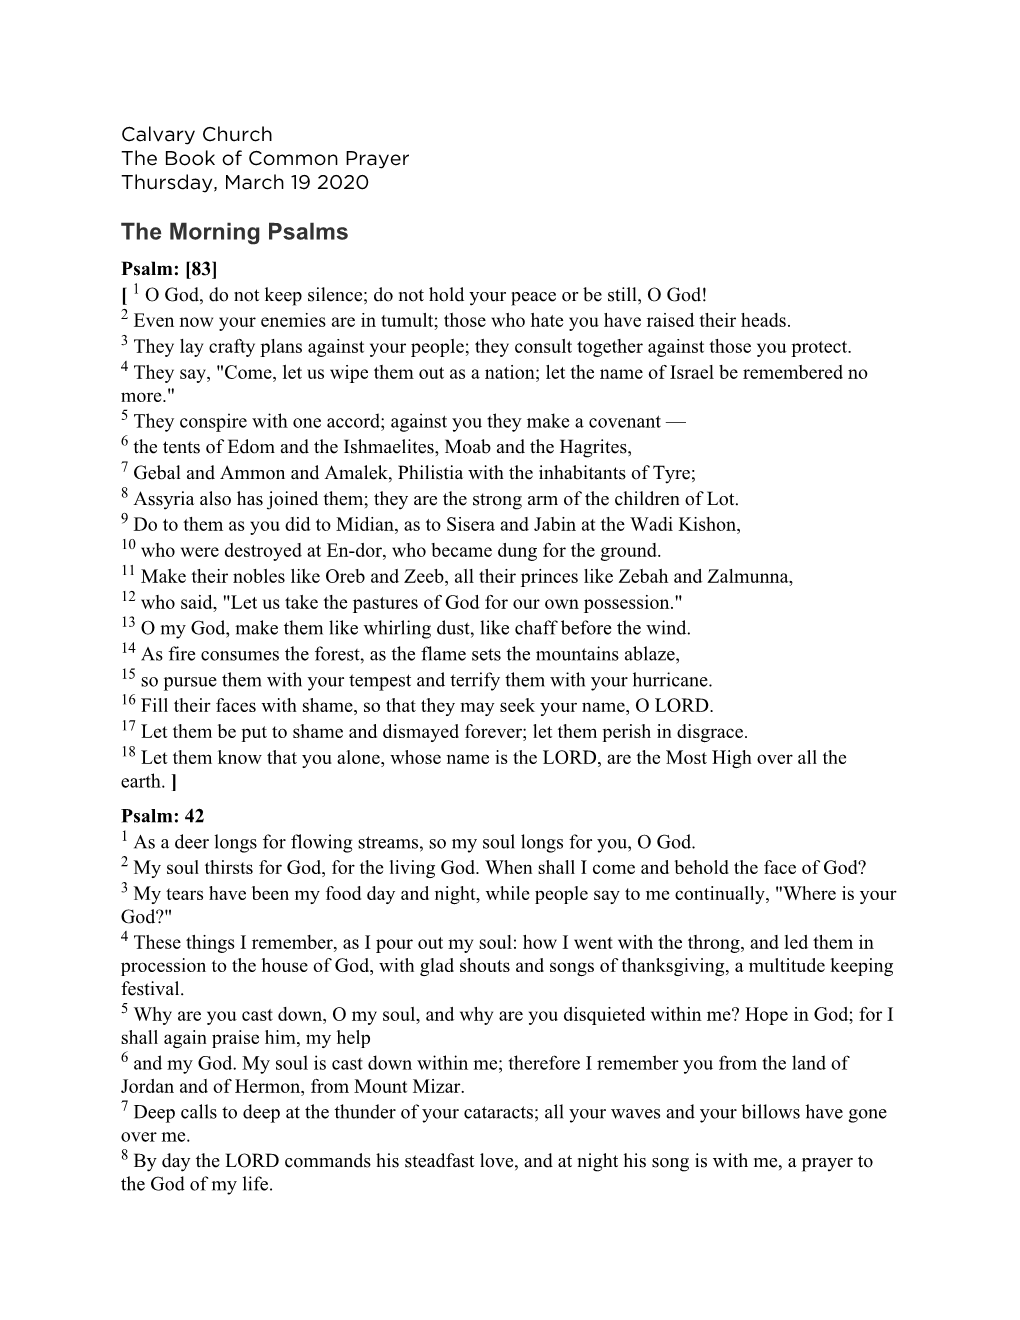 The Morning Psalms